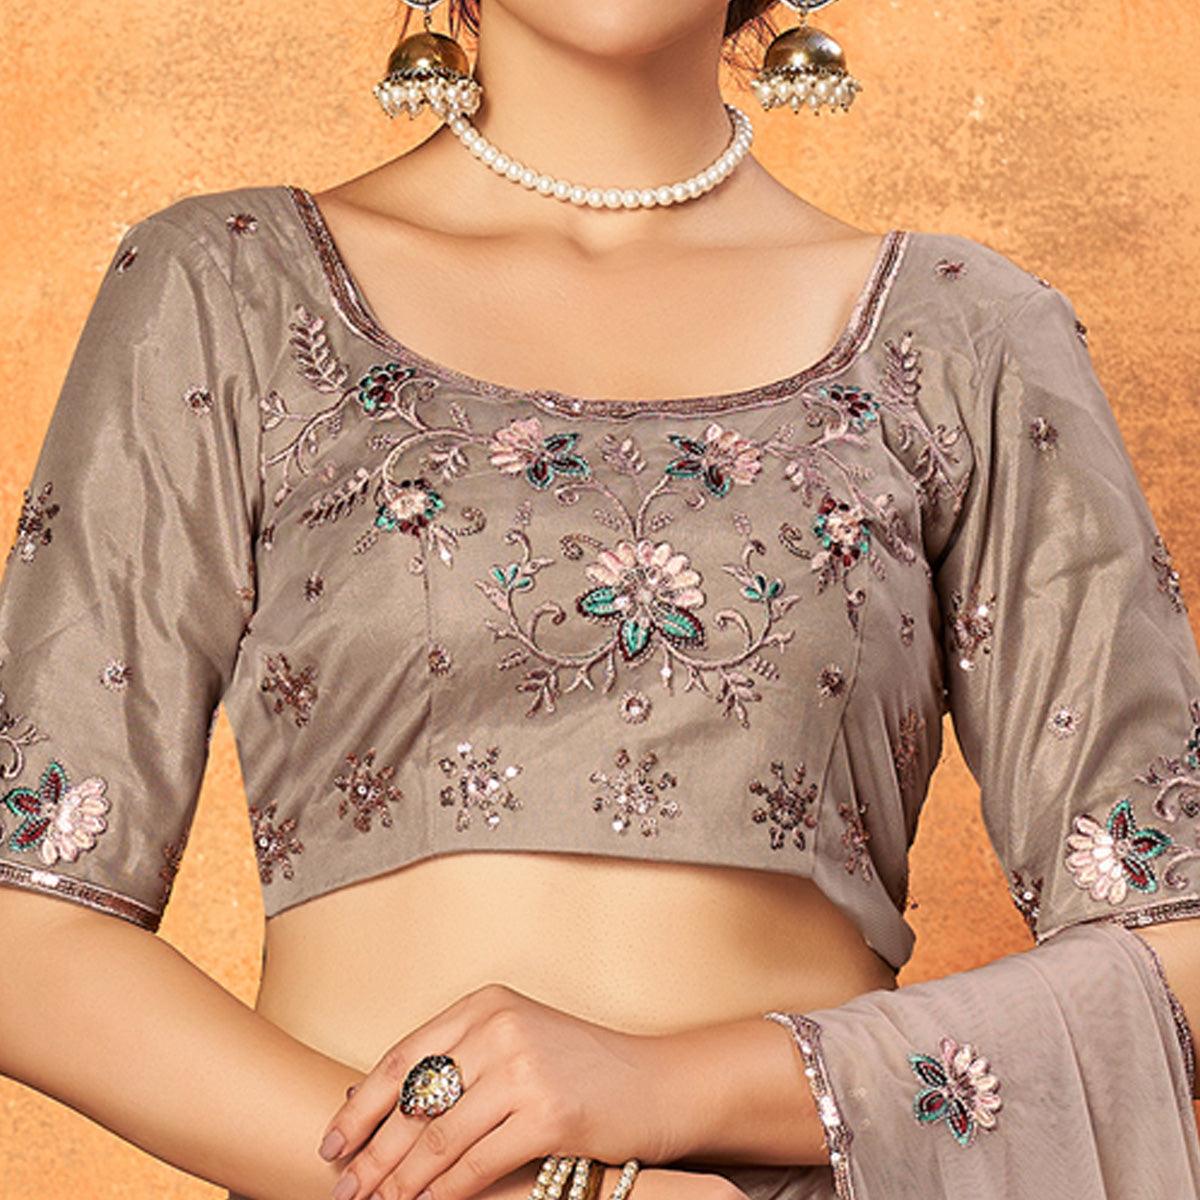 Dusty Brown Festive Wear Thread With Floral Sequence Embroidered Net Lehenga Choli - Peachmode